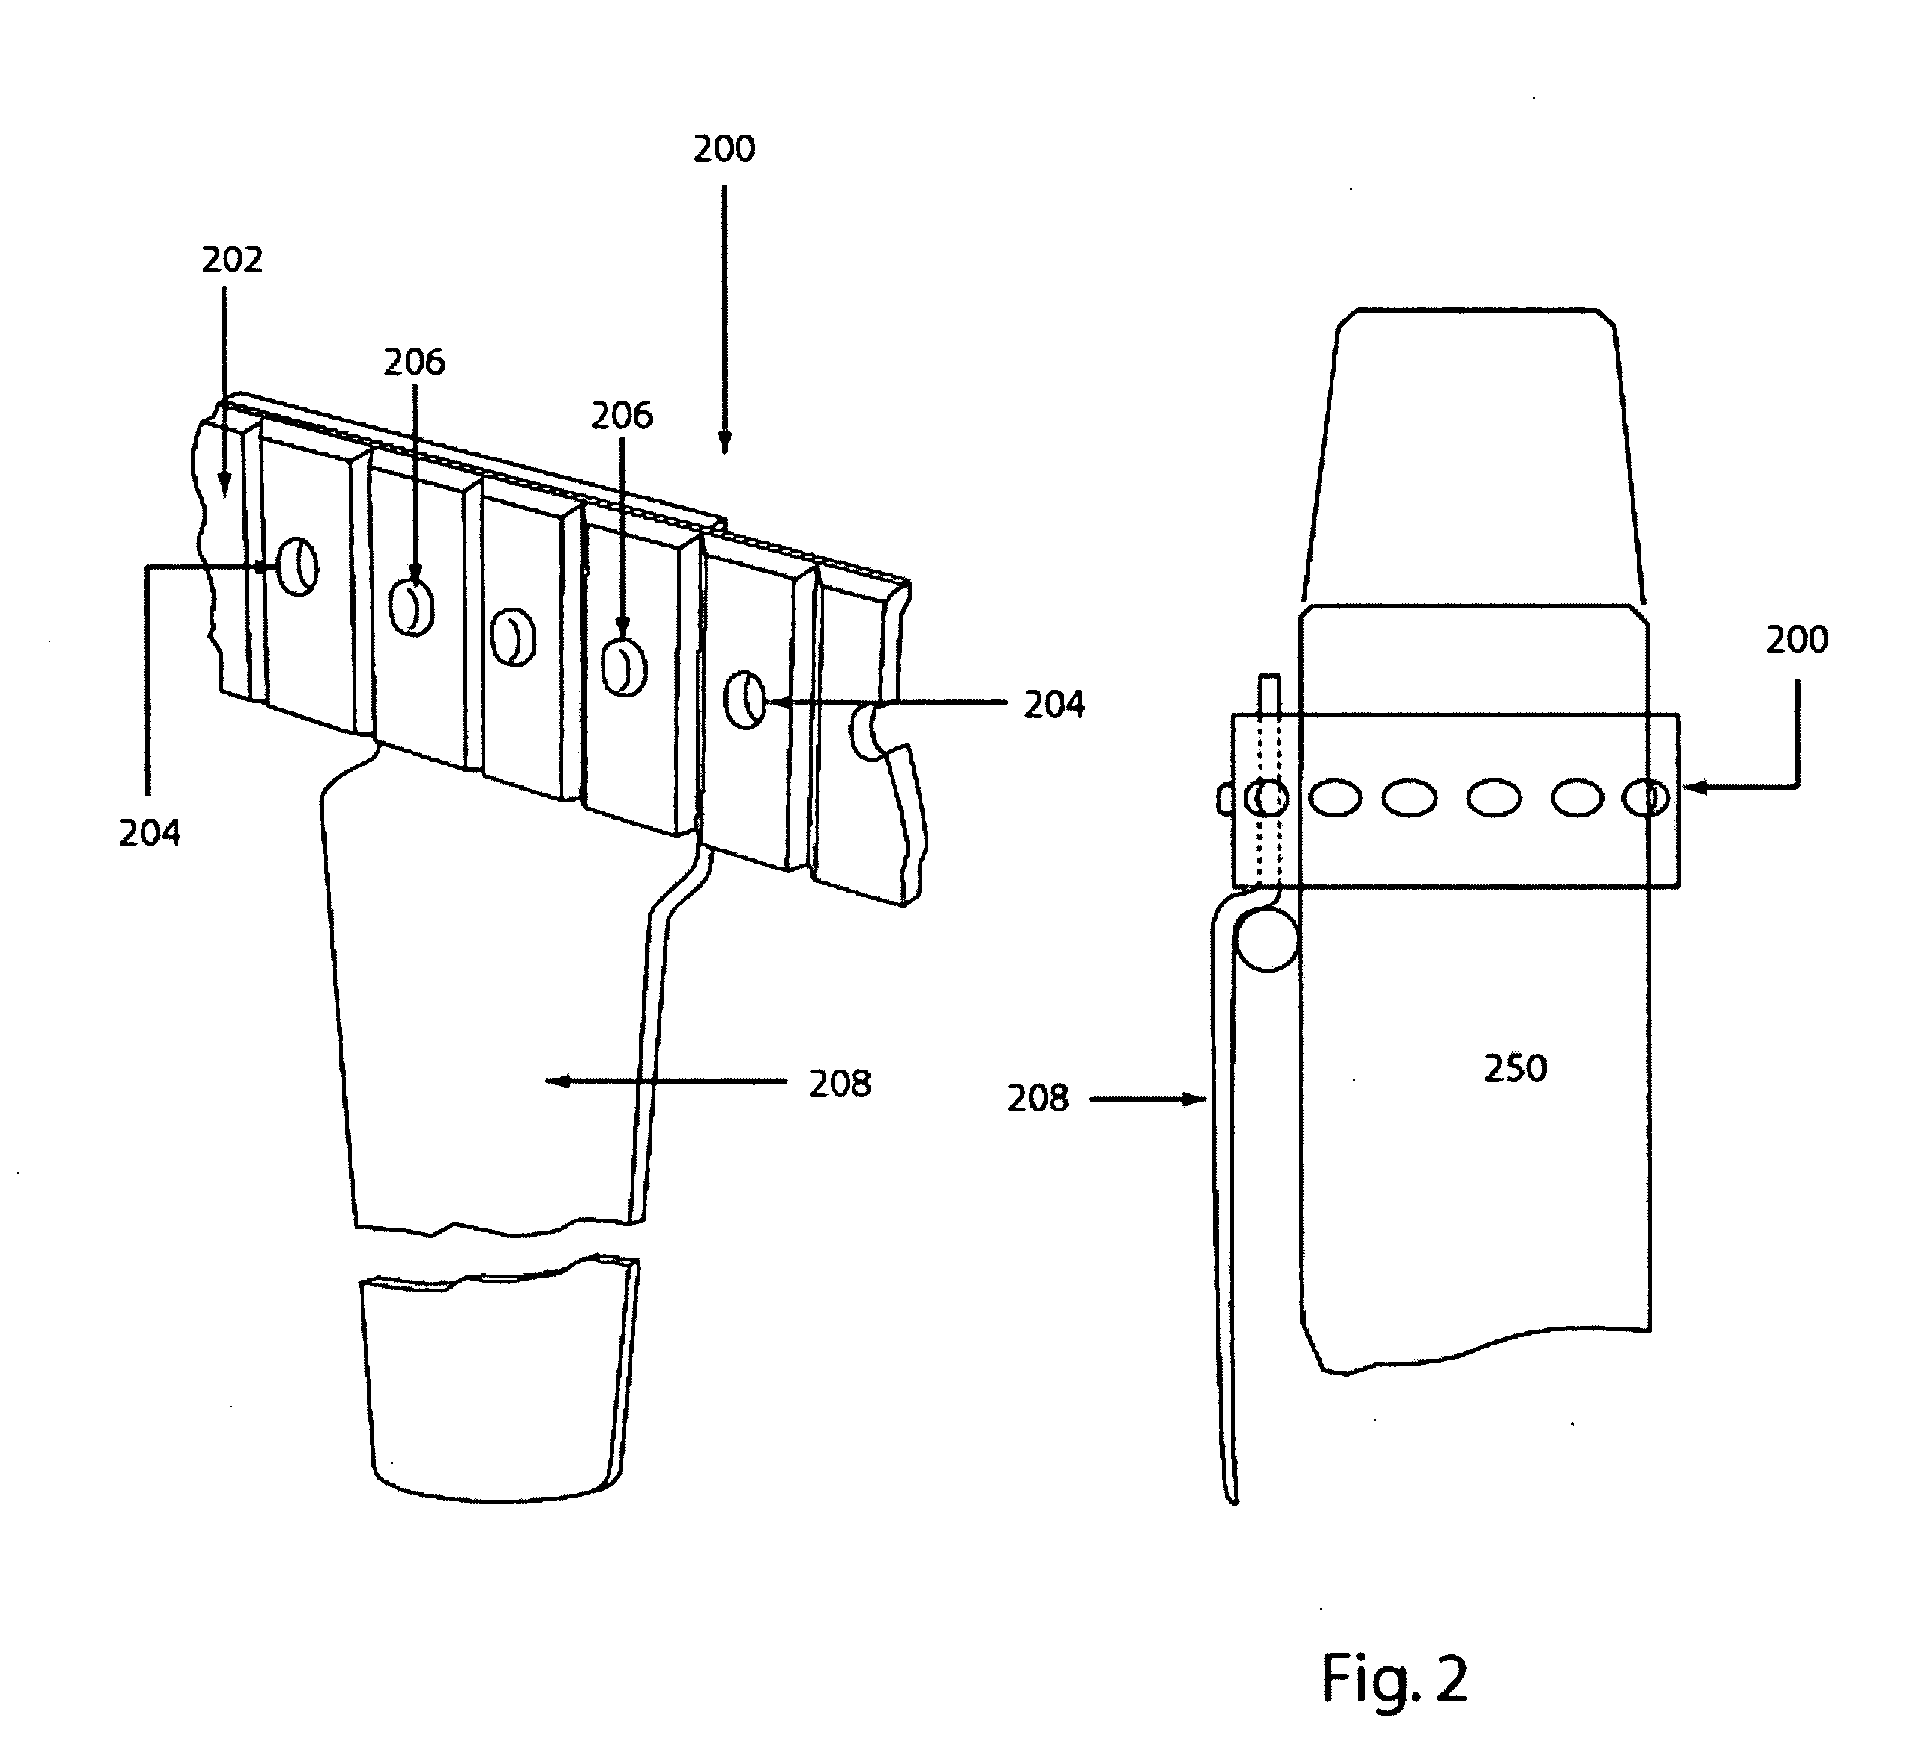 Universal mounting system